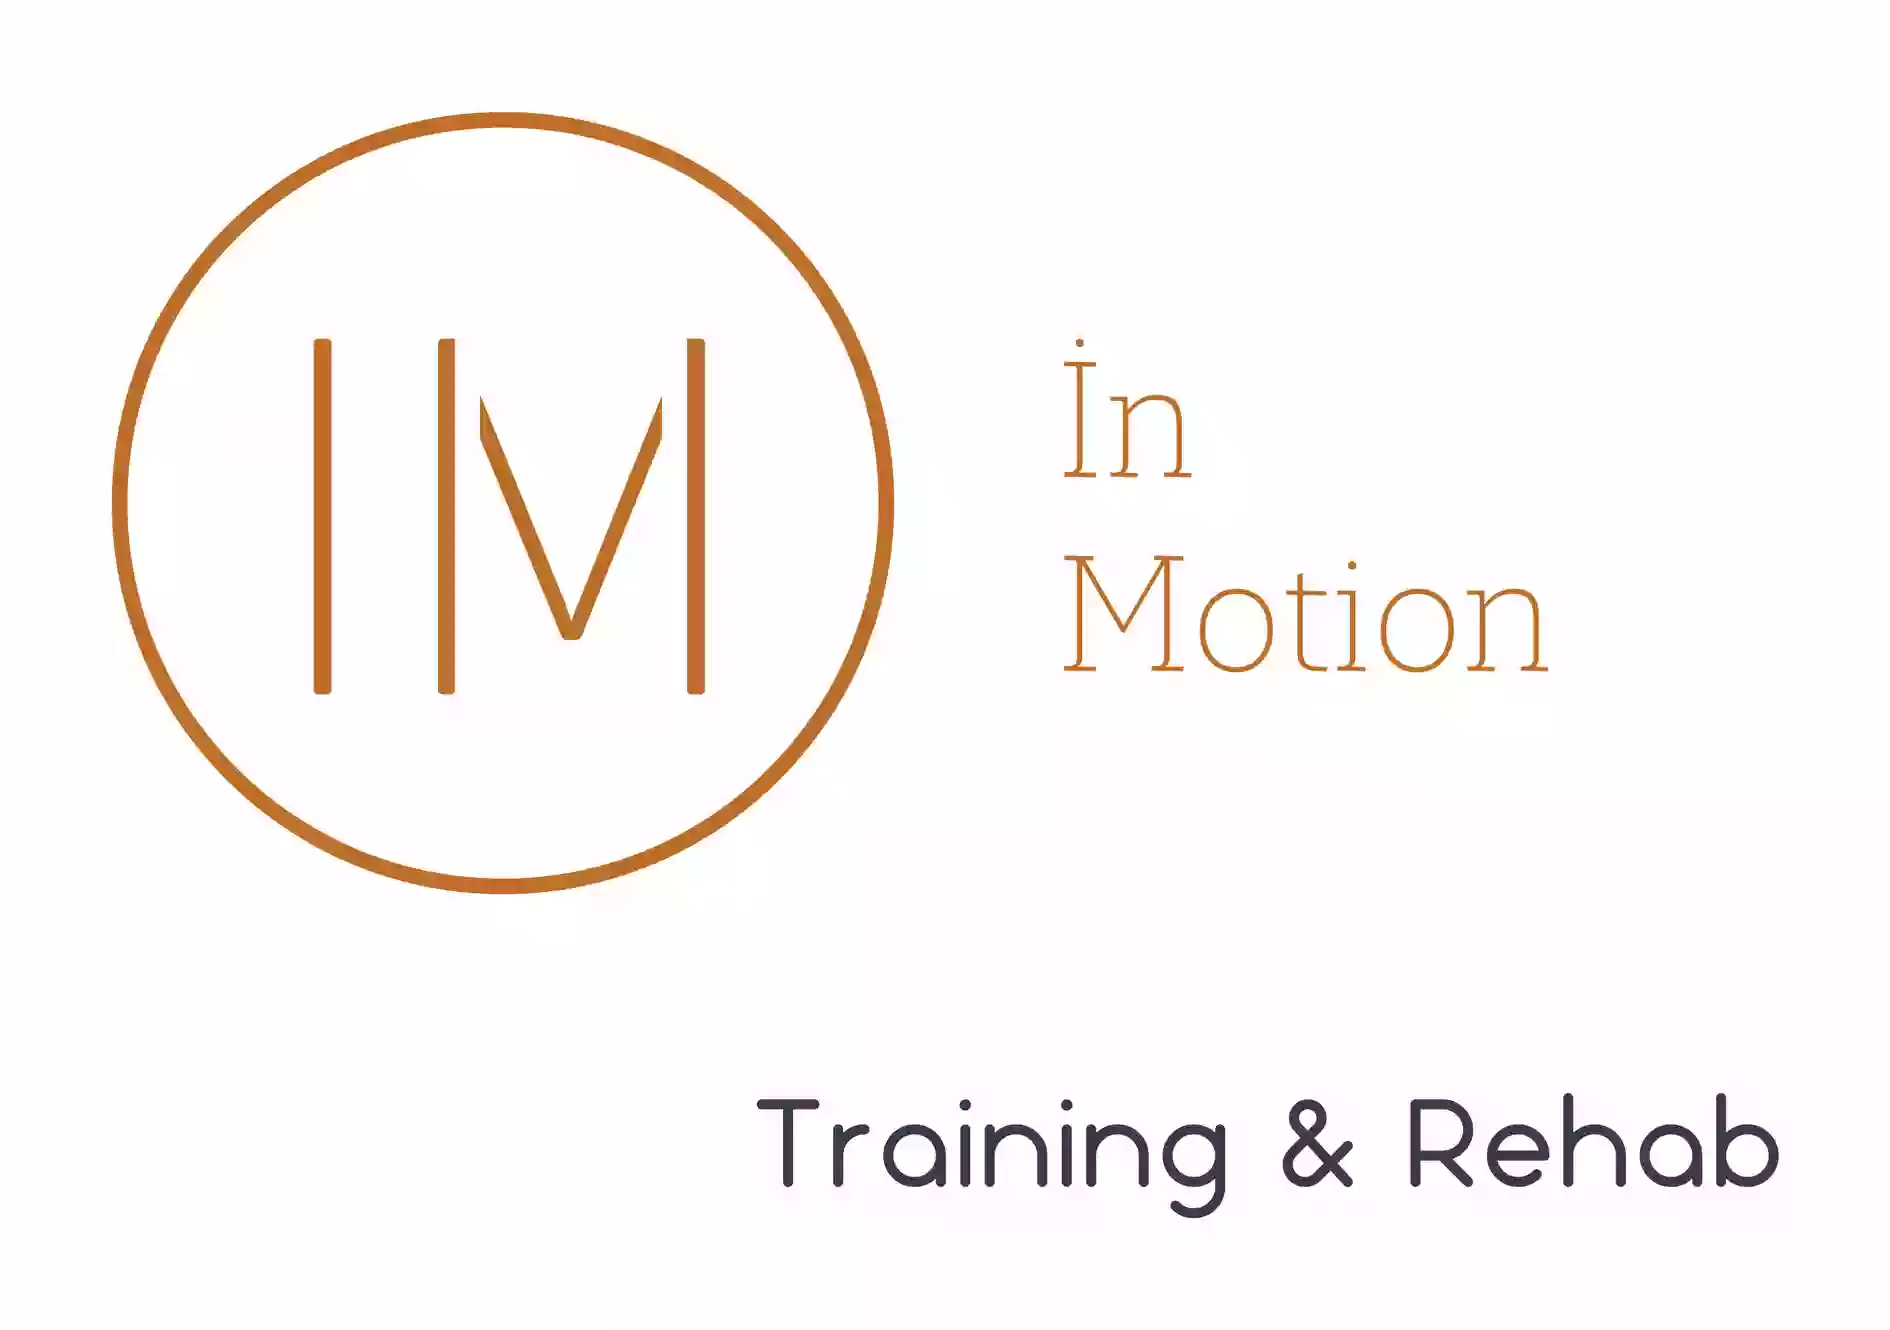 In Motion - Physical Therapy - Training & Rehab